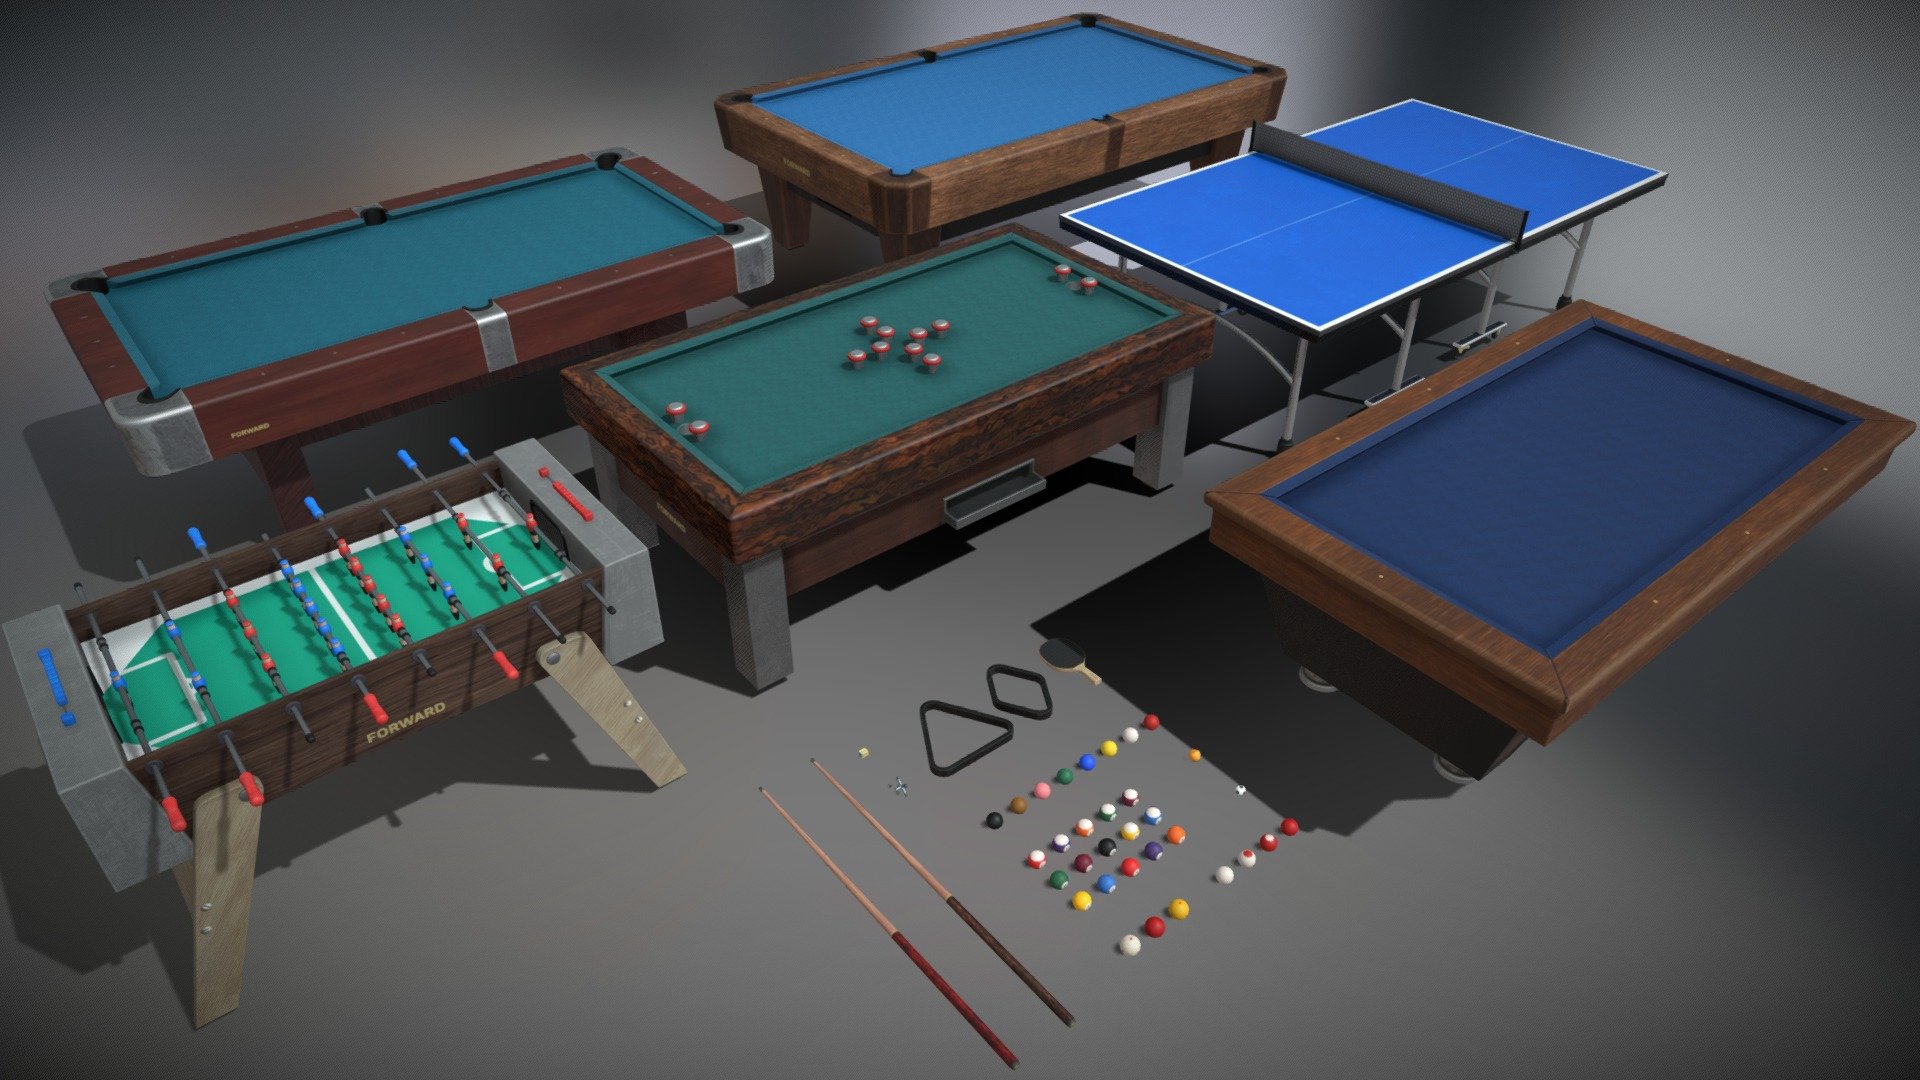 Mid-High poly game-ready models of table sports with PBR textures. I paid close attention to what dimensions all tables and corresponding balls should have and they're all in the ballpark :^) . 

Currently includes the following table sports: Billiards, Pool, Snooker, Bumperpool, Foosball, Tennis. All balls and props for these are also included (all models are named so no splitting hairs on finding out which ball belongs to which game. You'll need to duplicate the red snooker balls and full red and full white bumper pool balls though).

The tennis table is completely foldable.

May be revising and adding more stuff in the future to improve quality of the models, textures and pack. Be sure to shout out more table sports that I've missed, I'd love to hear of more games I haven't heard of before! - Table Sports pack (snooker, pool, foosball, etc) - Buy Royalty Free 3D model by Feroxxy 3d model